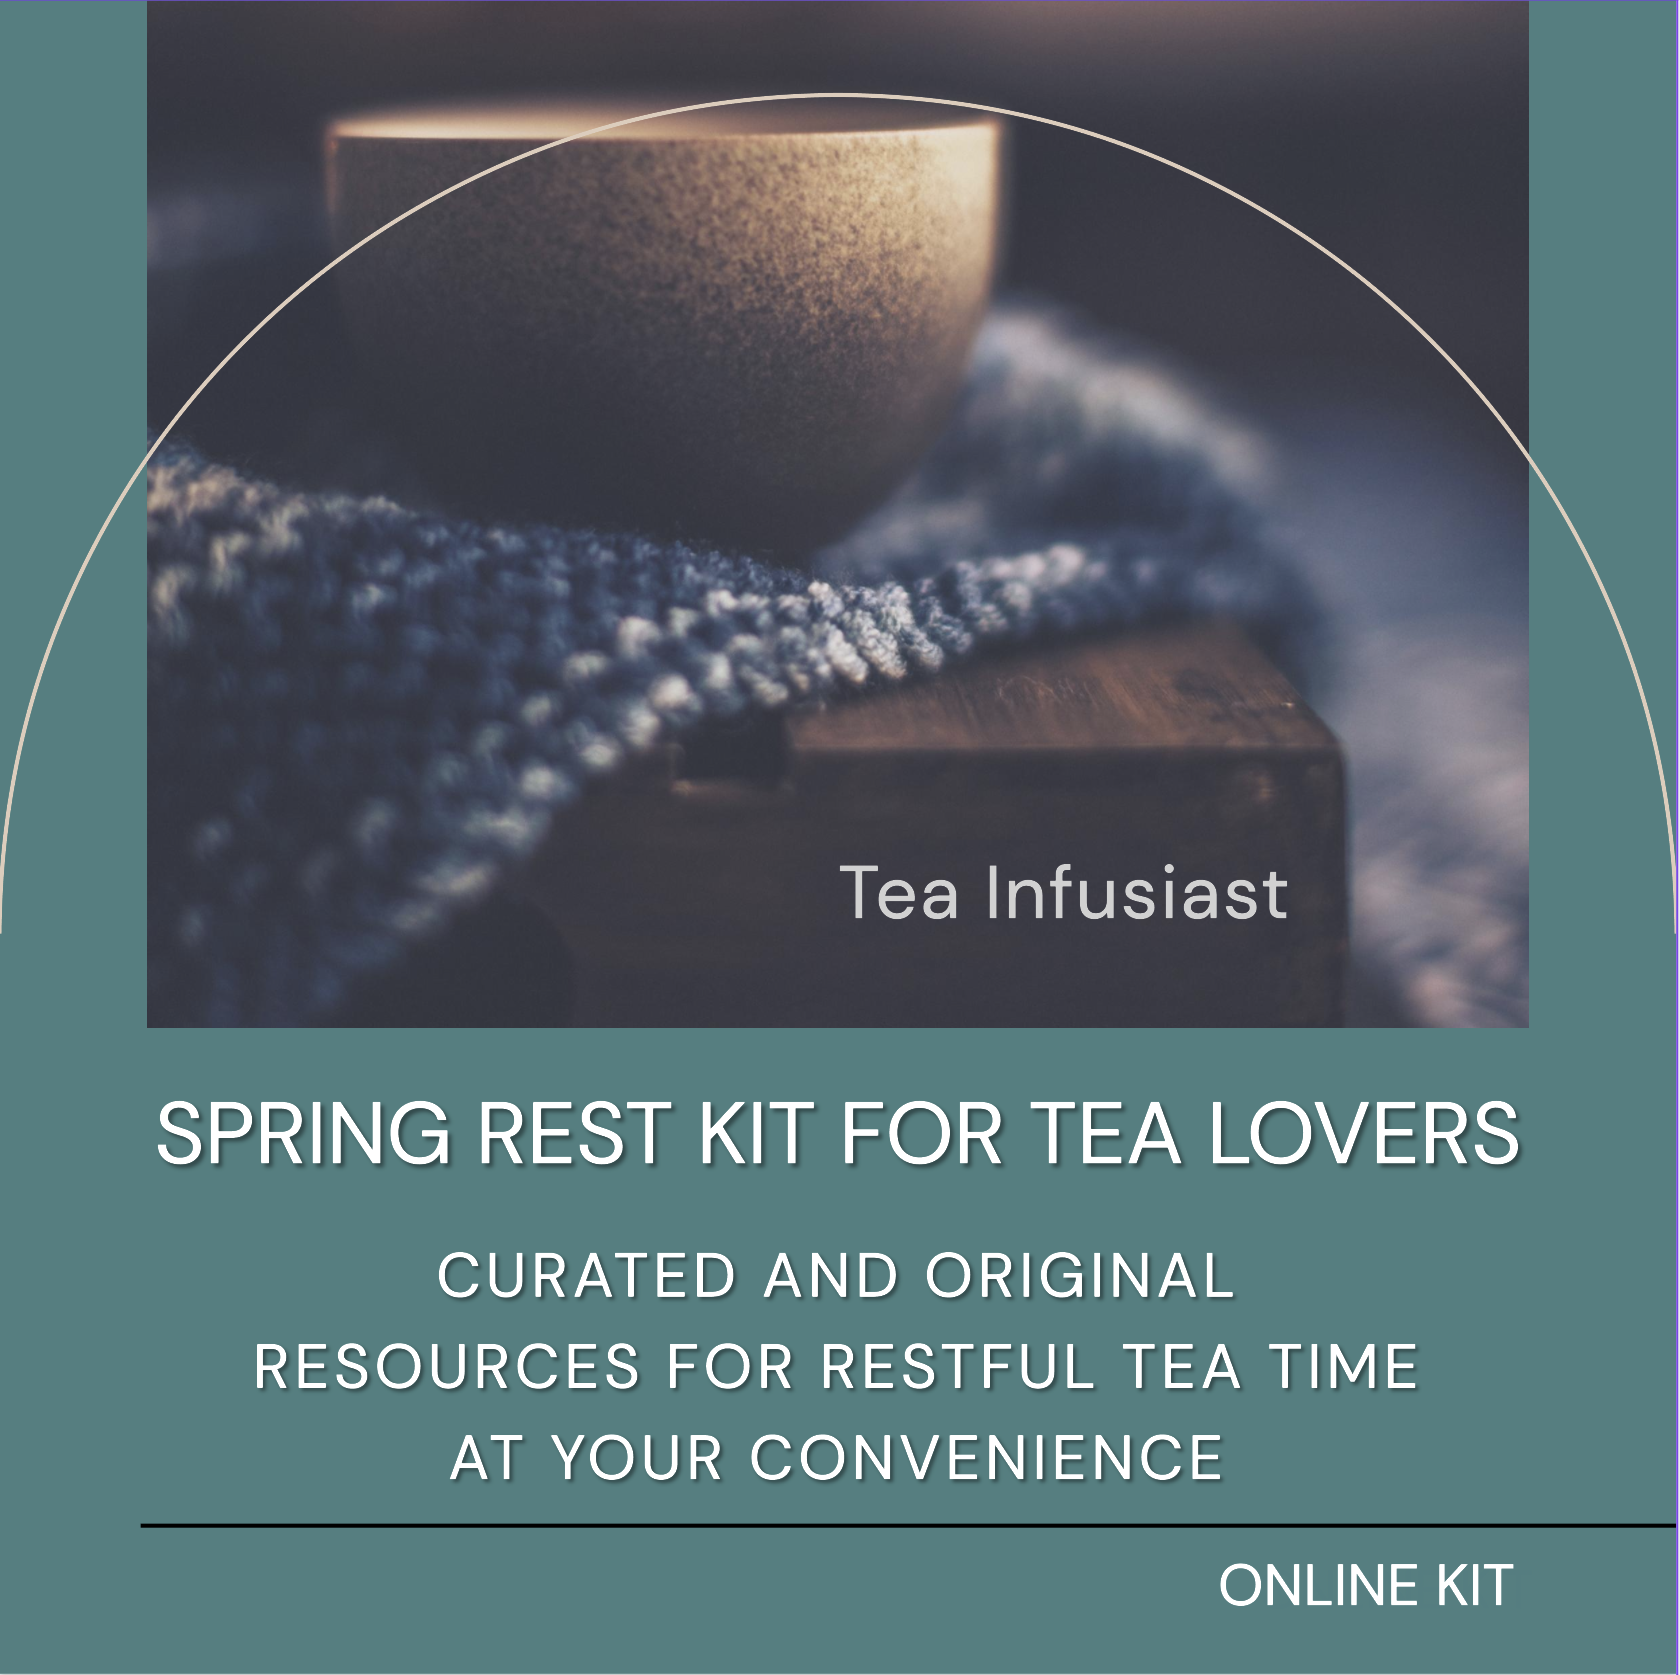 Spring Rest Kit for Tea Lovers: Photo of brown ombre teacup on a blue and white piece of fabric sitting on a tea chest